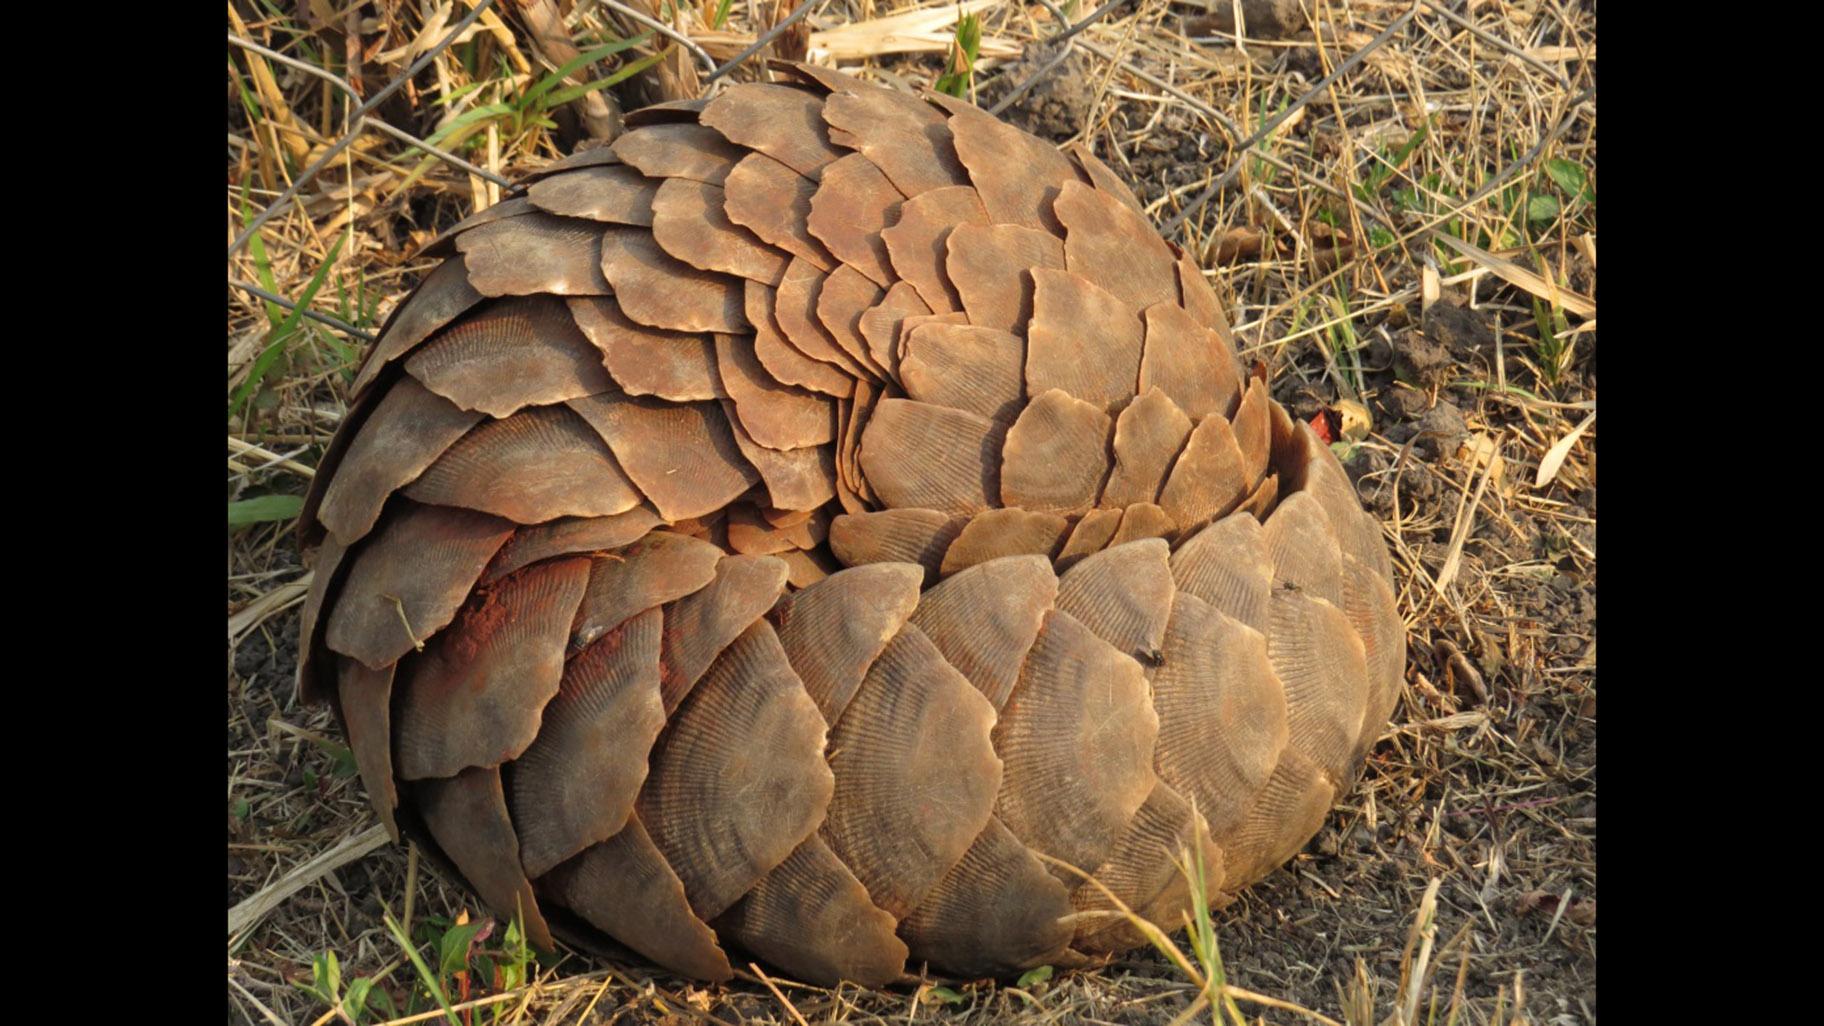 Pangolins curl up in a ball when threatened, their scales forming a solid armor. (Tikki Hywood Trust / US Fish and Wildlife Service / Flickr)